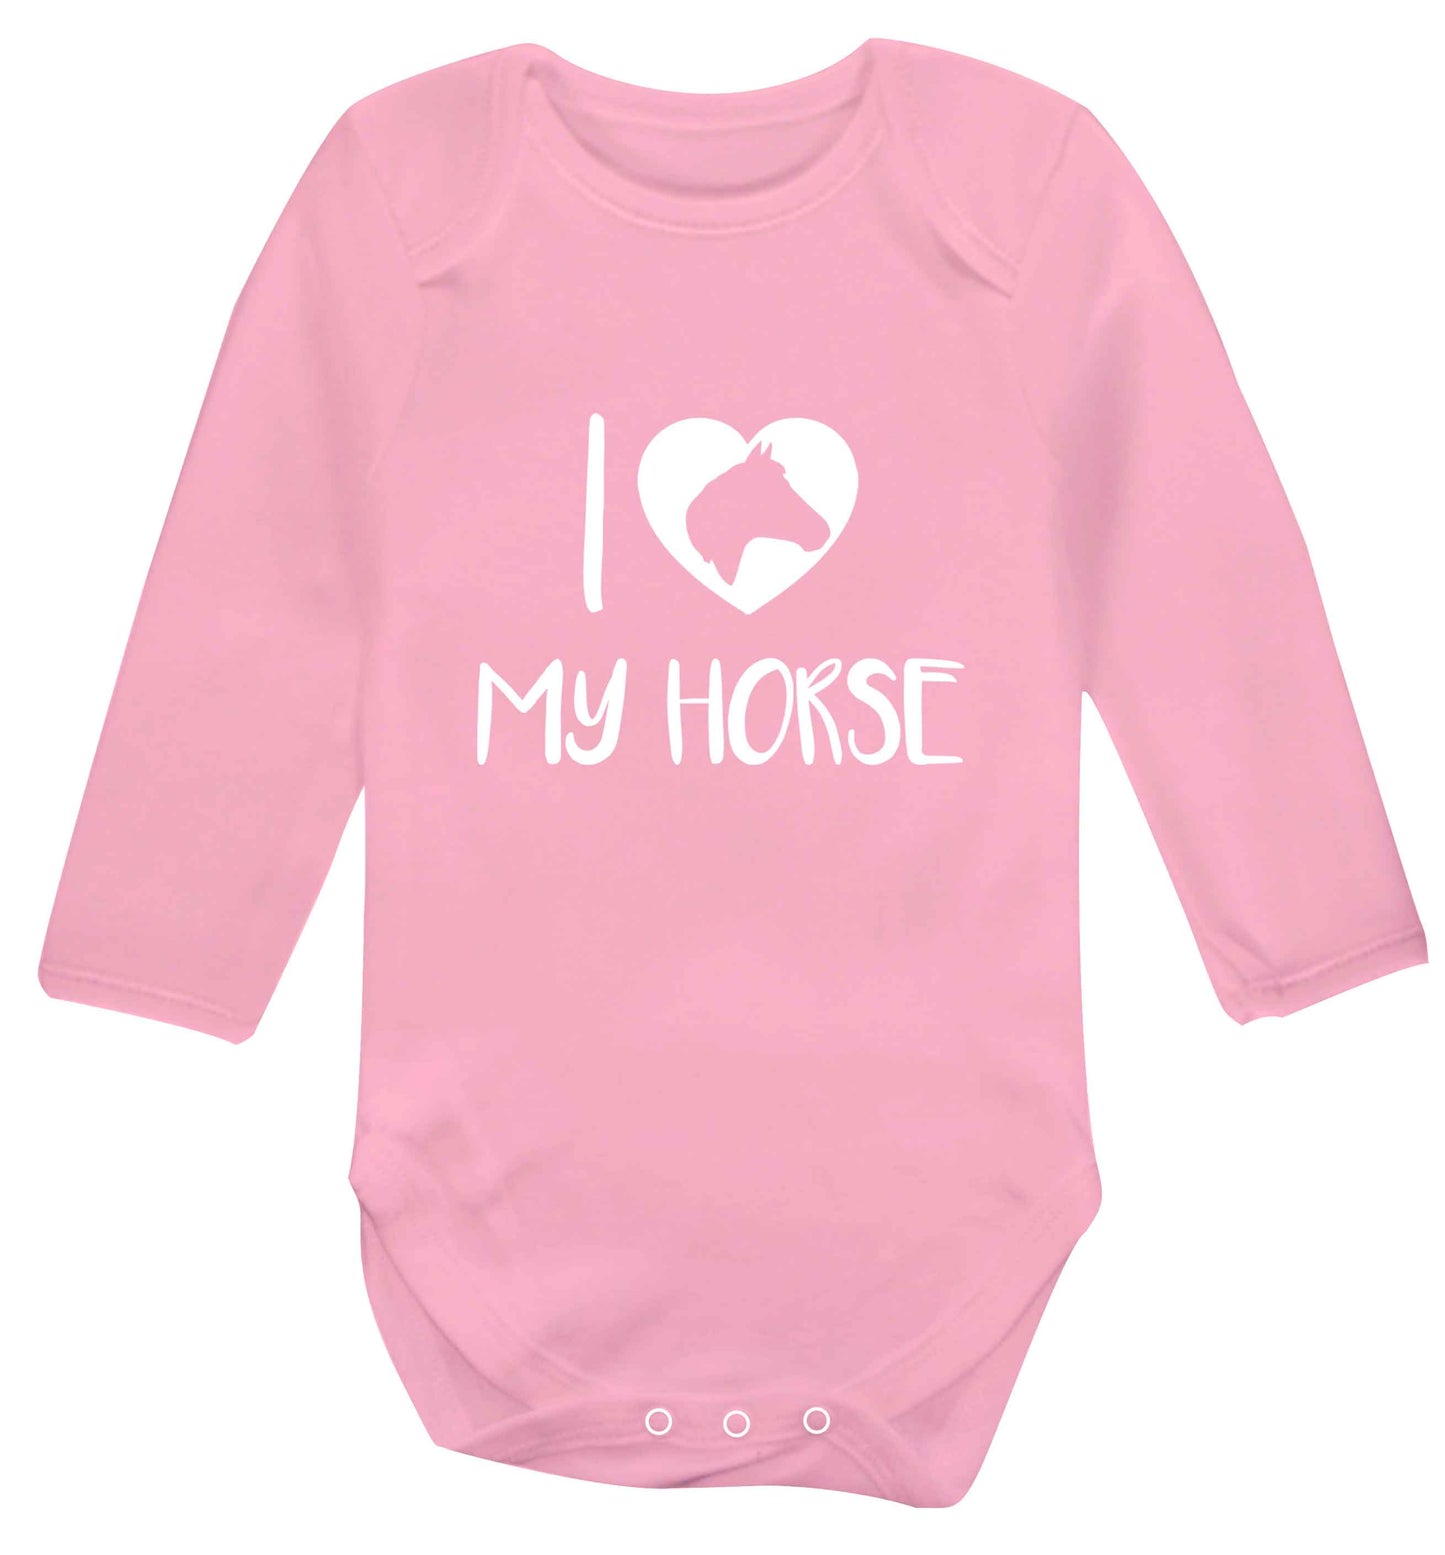 I love my horse baby vest long sleeved pale pink 6-12 months